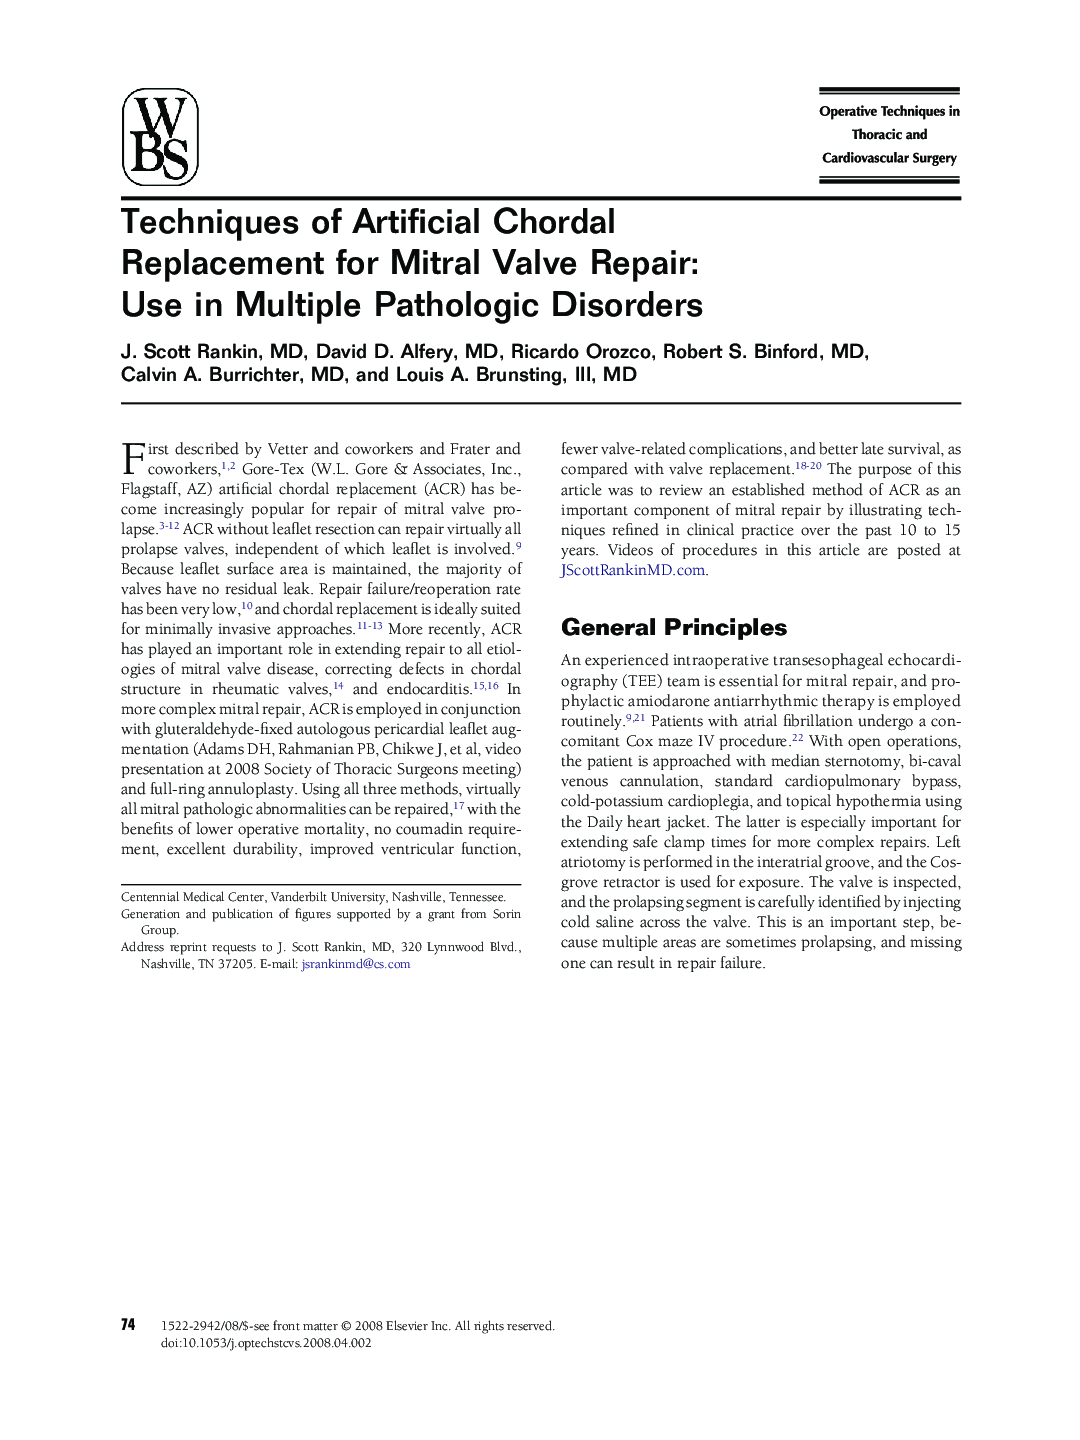 Techniques of Artificial Chordal Replacement for Mitral Valve Repair: Use in Multiple Pathologic Disorders